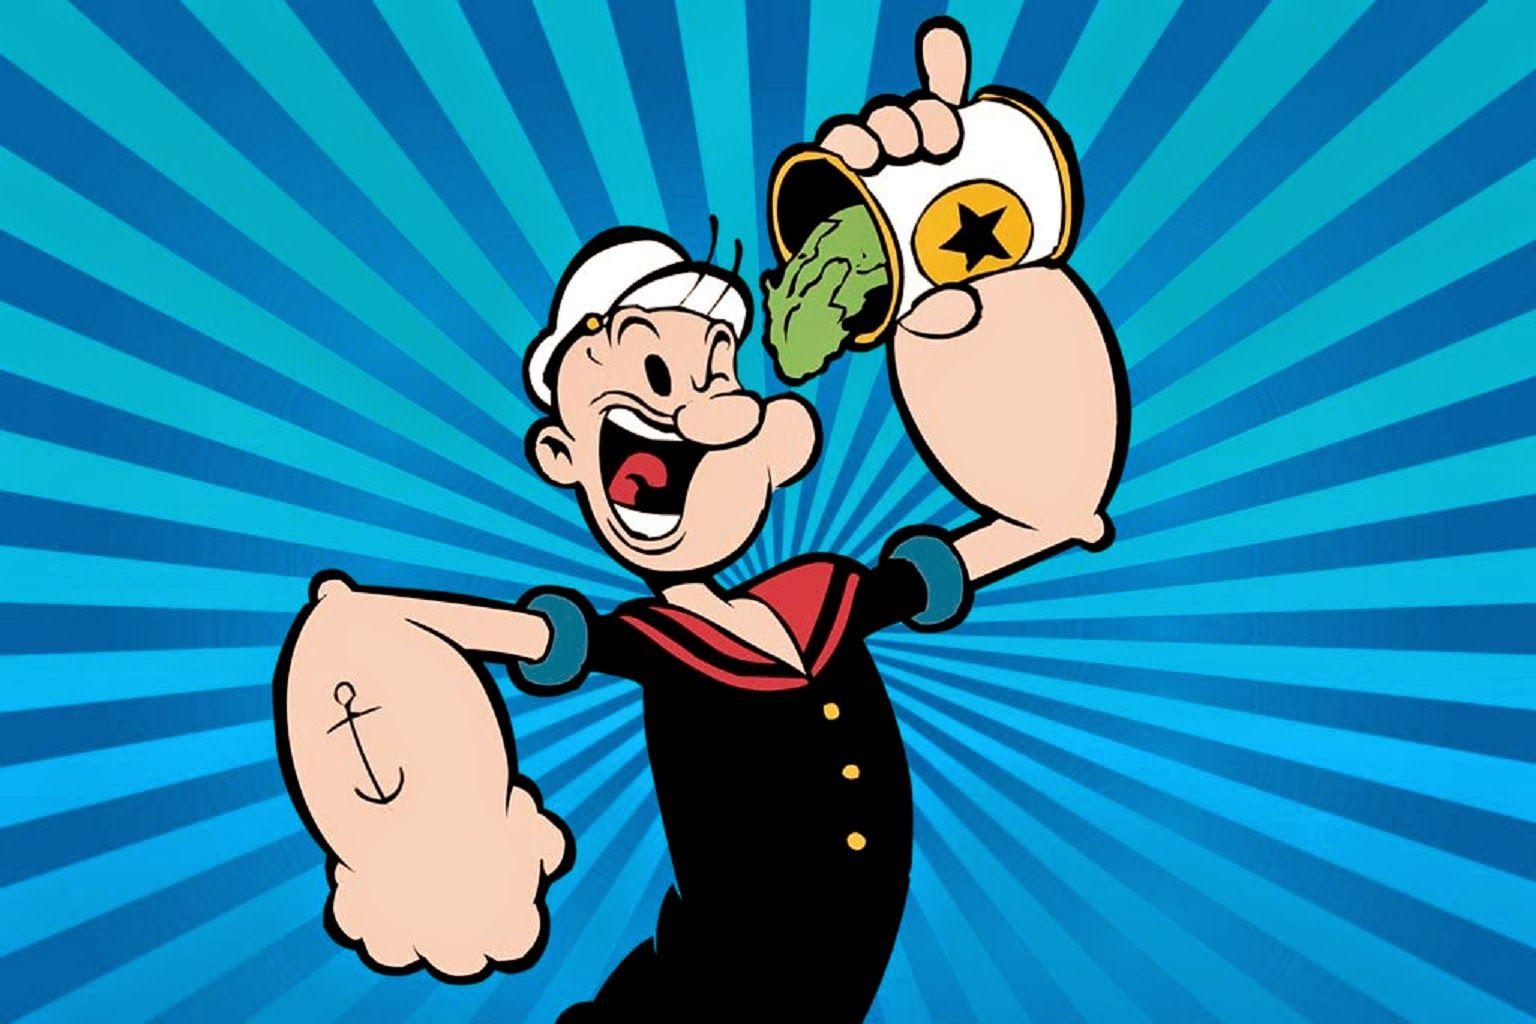 Download Popeye wallpapers for mobile phone free Popeye HD pictures